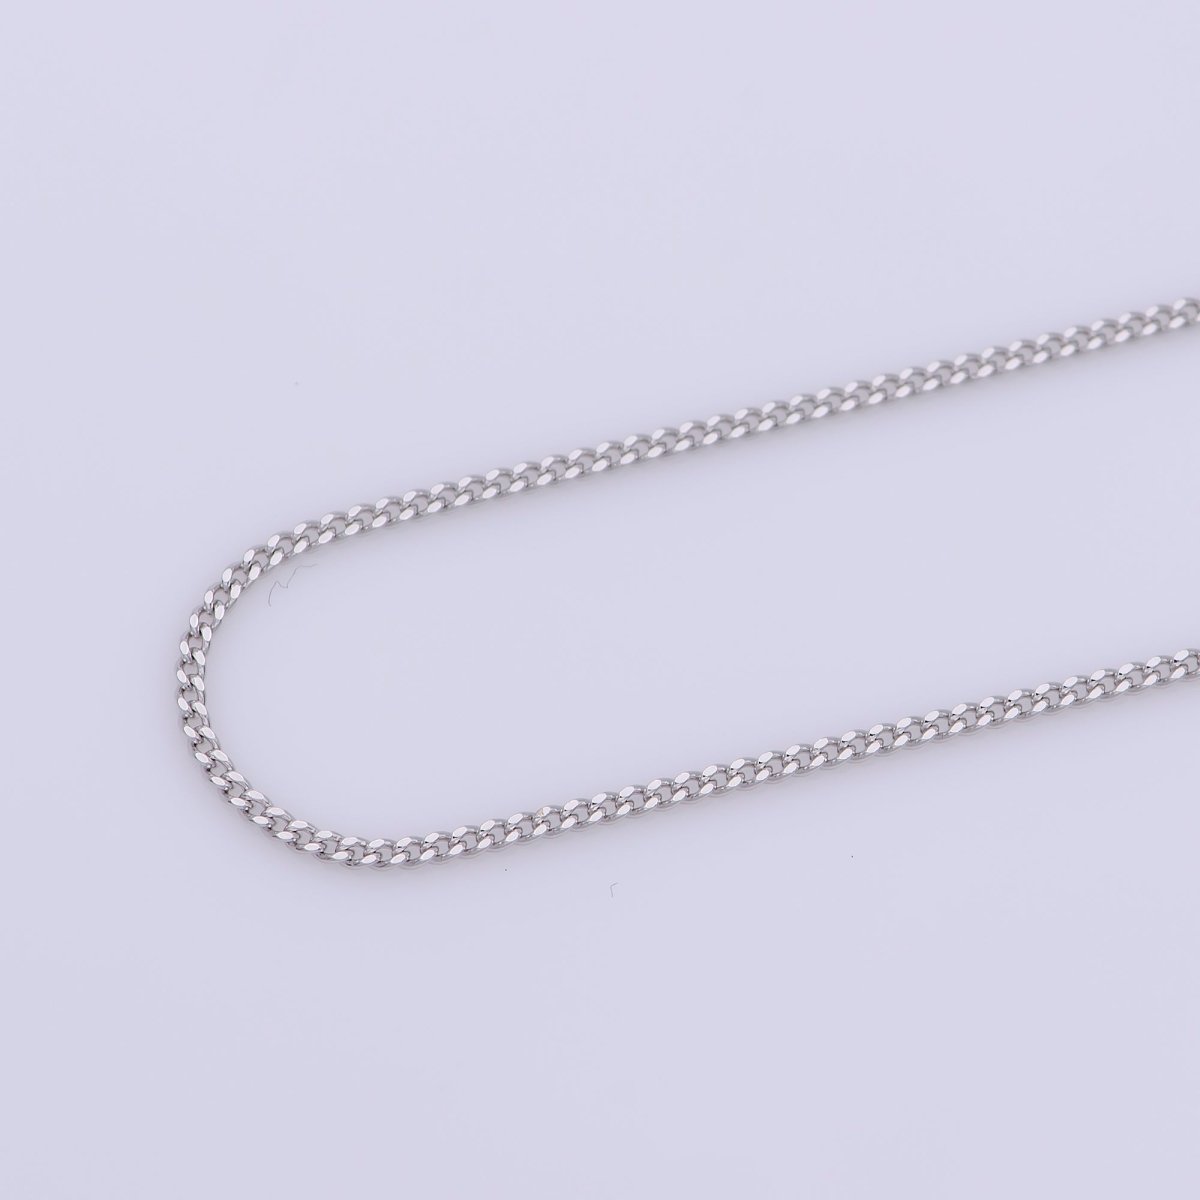 Silver Curb Chain Necklace, Dainty Silver Necklace, Dainty Finished Silver Chain 18 inch 0.8mm Ready to wear Silver Chain | WA-237 Clearance Pricing - DLUXCA